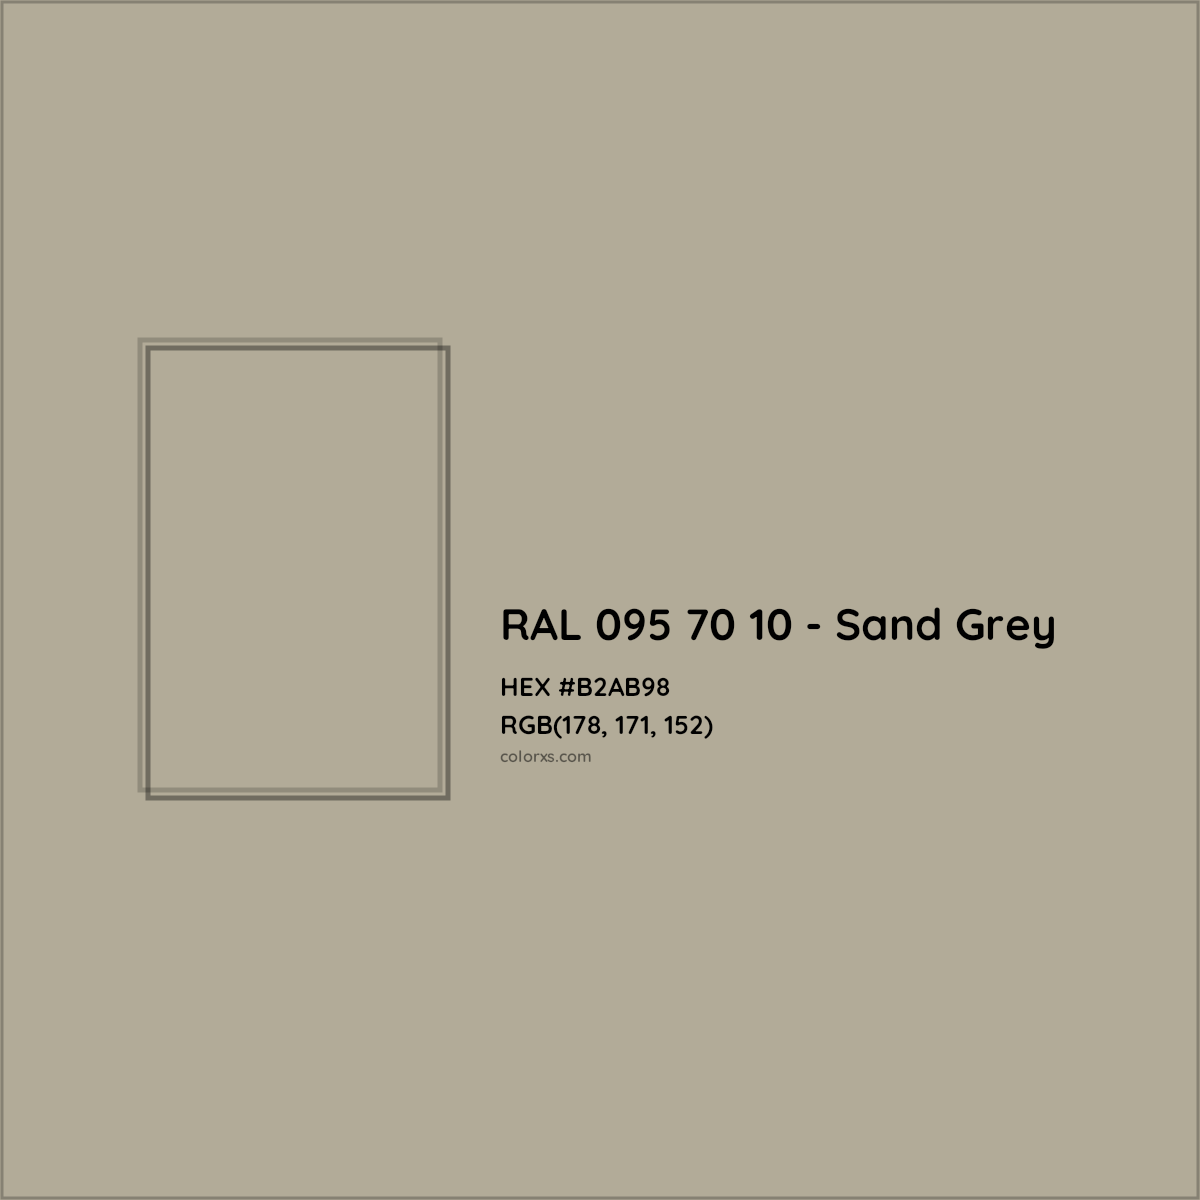 HEX #B2AB98 RAL 095 70 10 - Sand Grey CMS RAL Design - Color Code